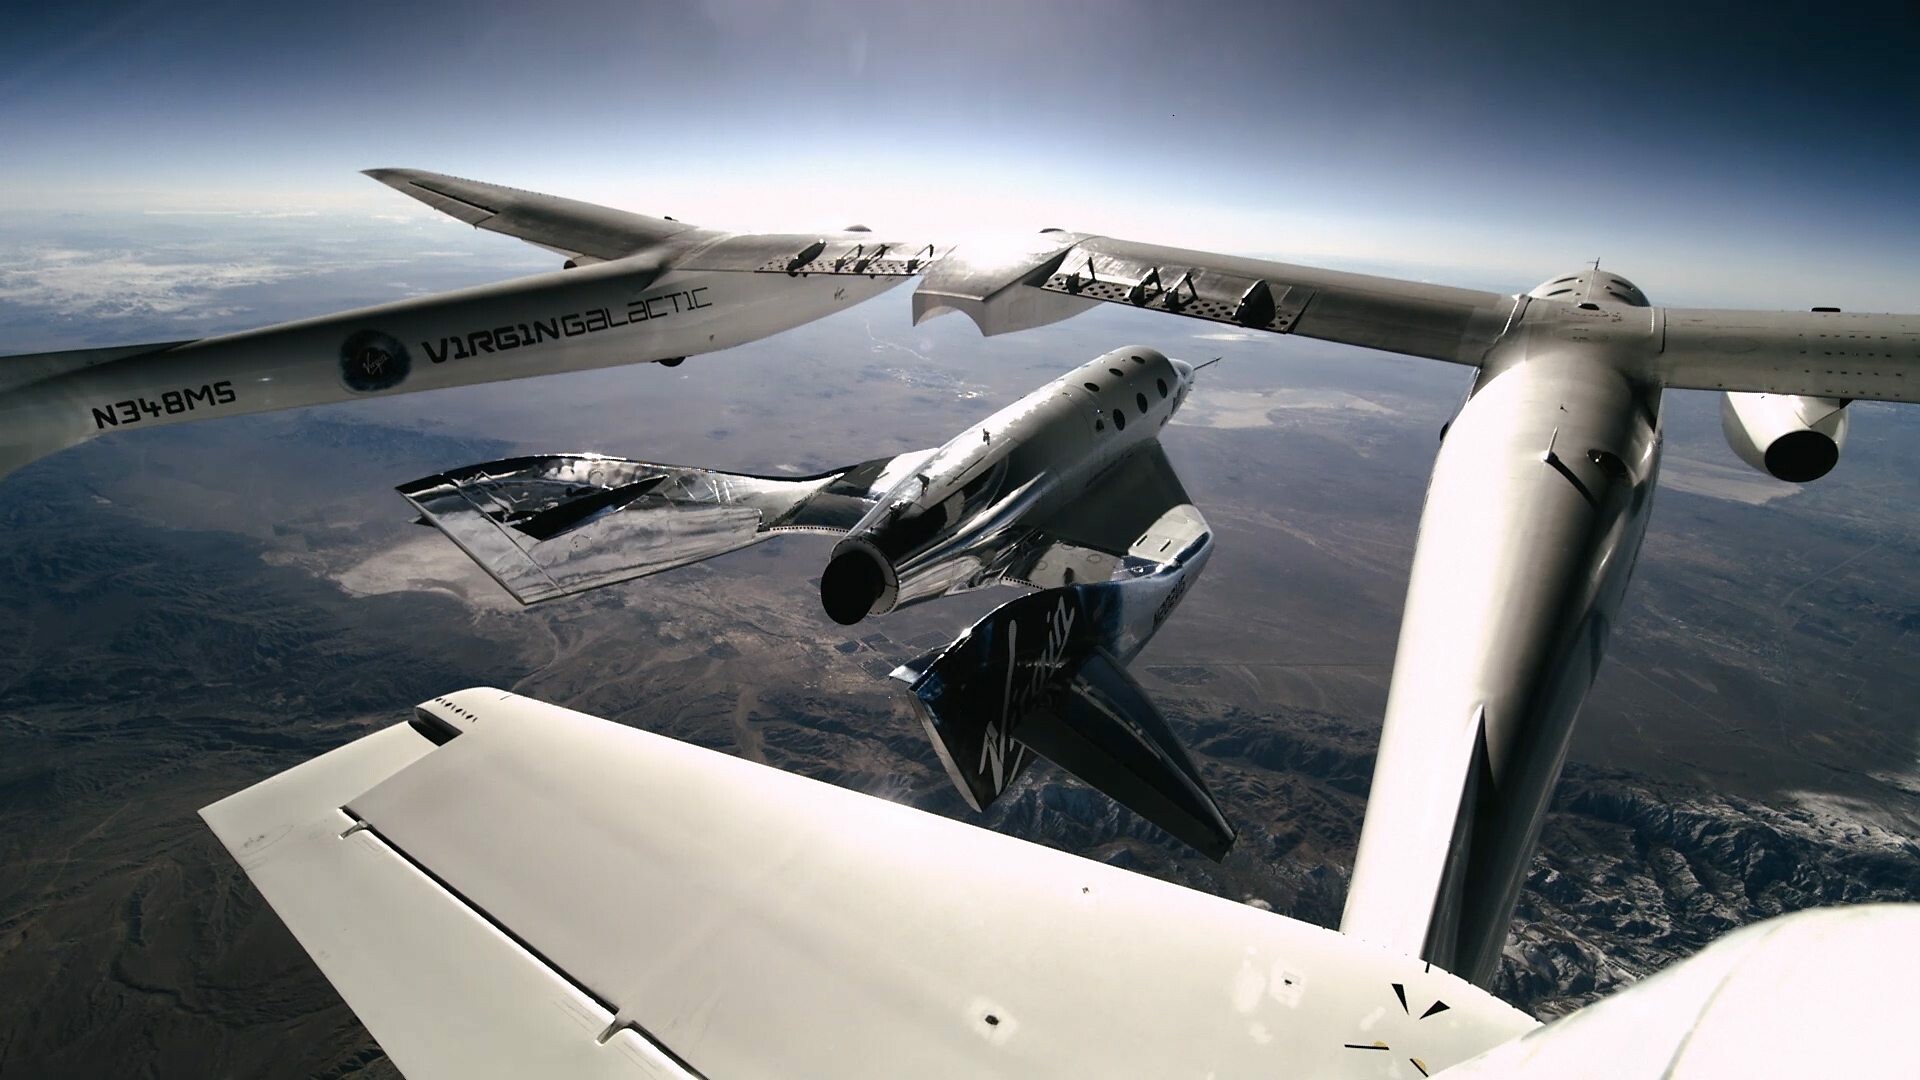 Virgin Galactic: A commercial spaceline that develops commercial spacecrafts. 1920x1080 Full HD Wallpaper.